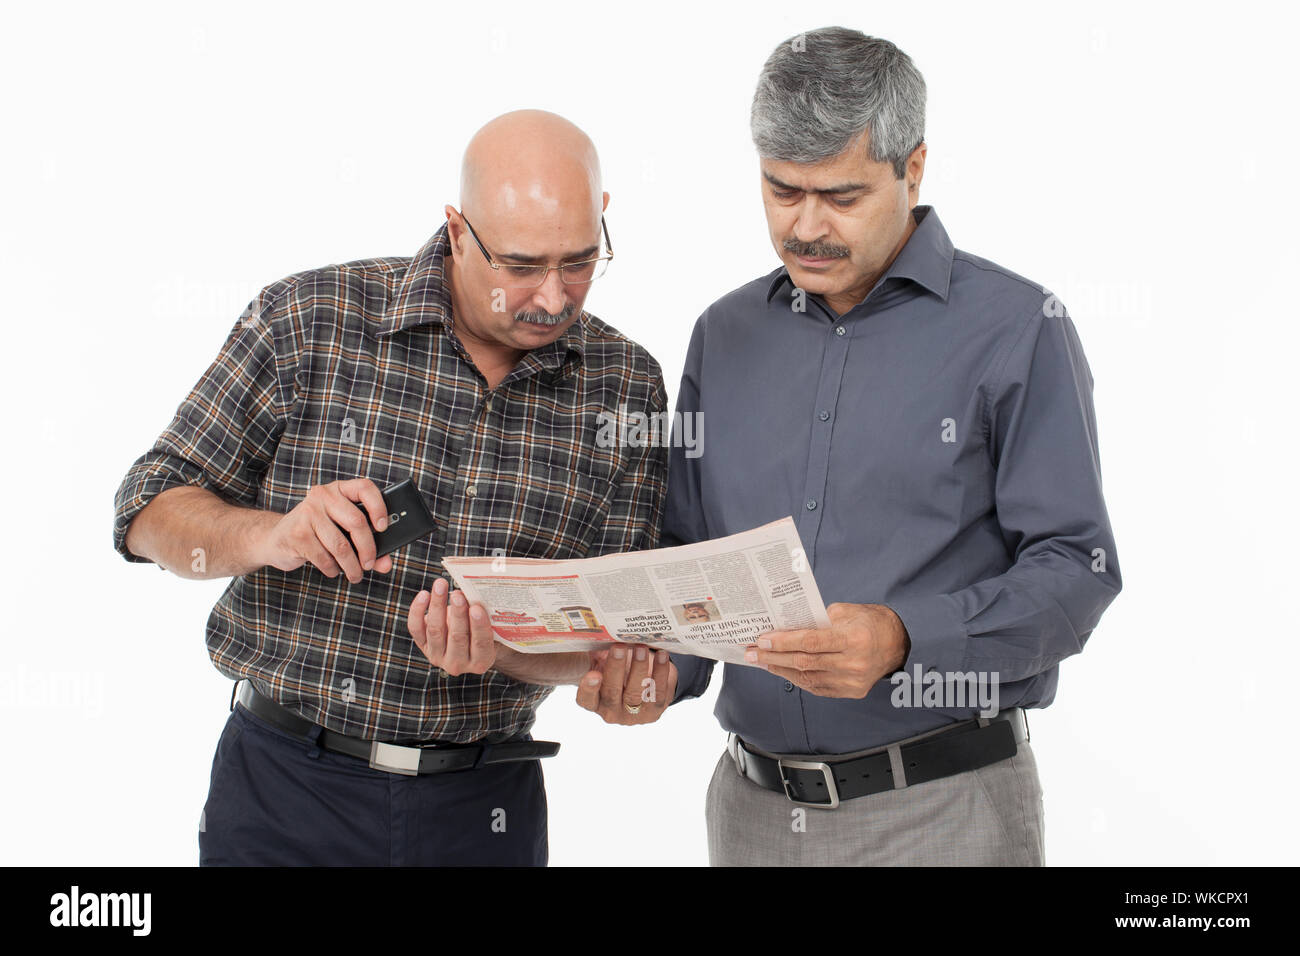 Two businessmen reading a newspaper Stock Photo